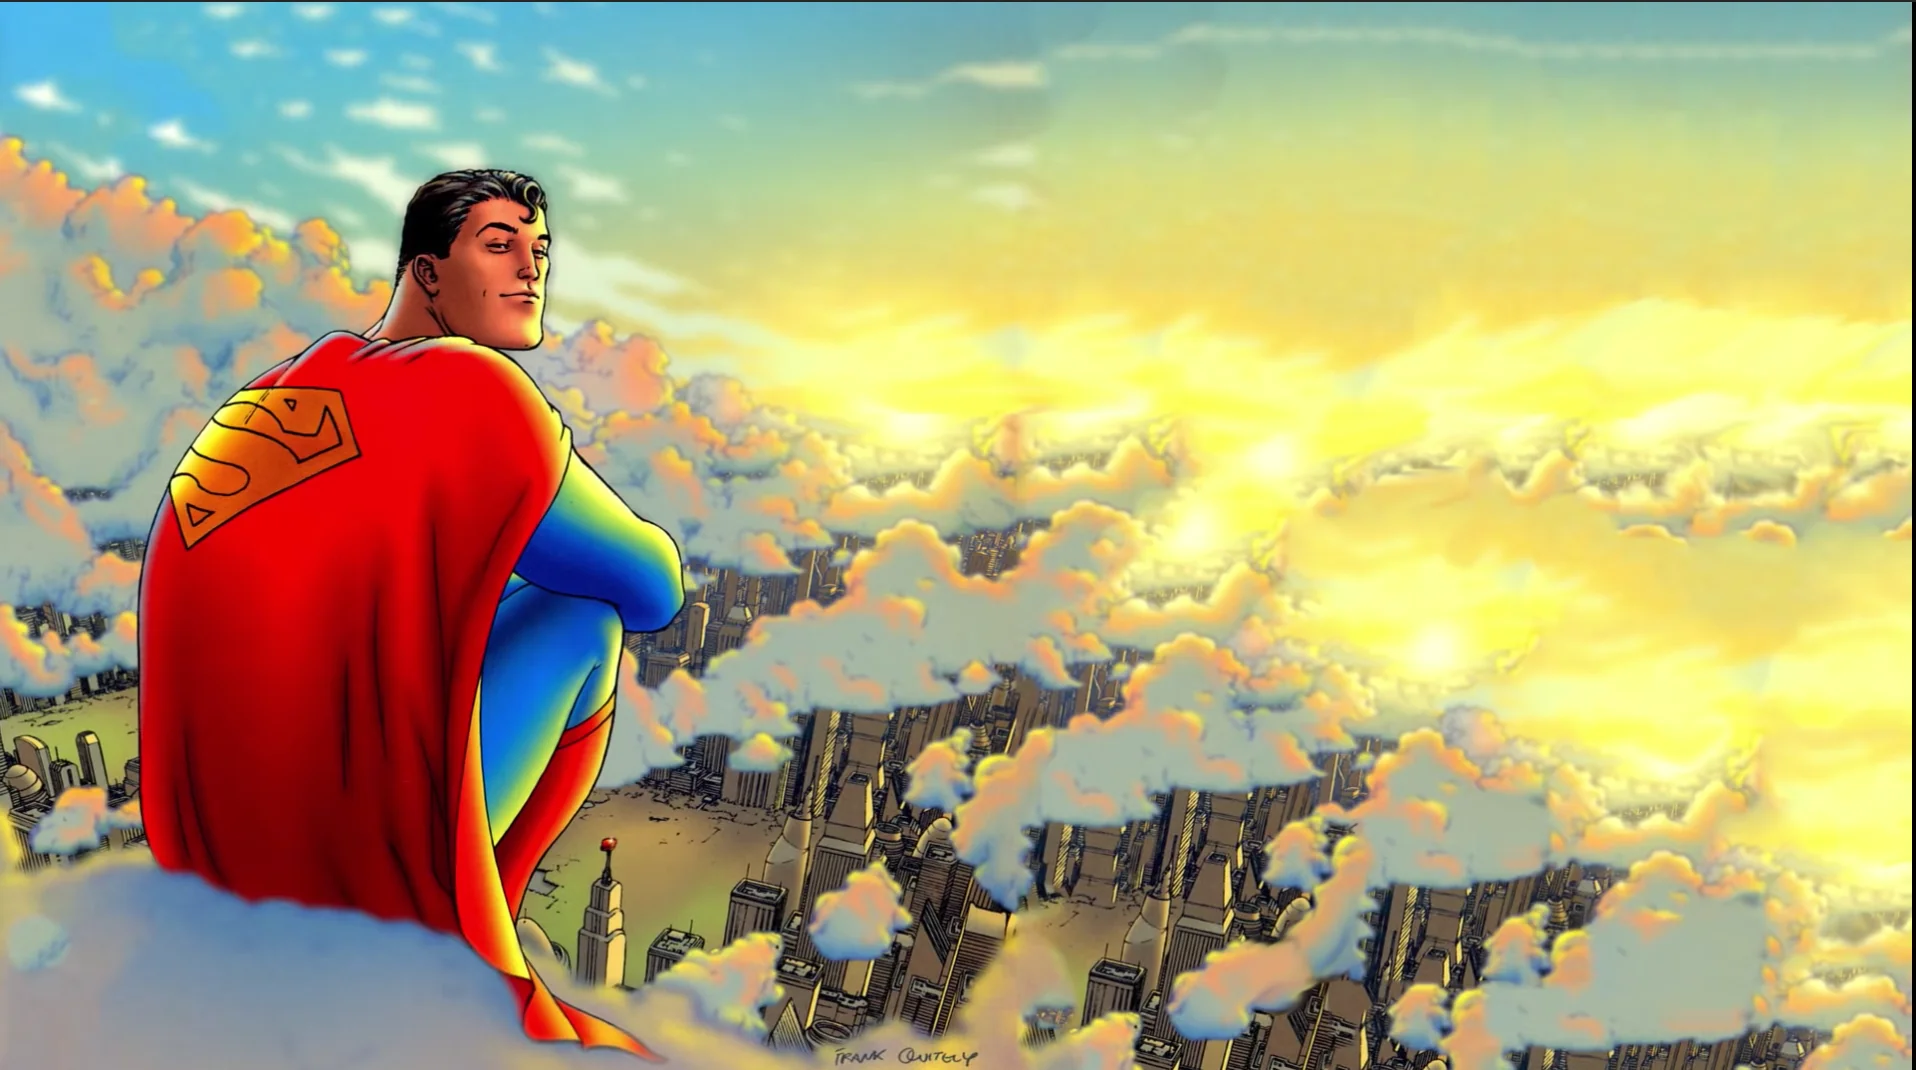 General 1916x1070 Superman superman logo comic art comic character city clouds sunset Frank Quitely sitting Grant Morrison sky cityscape cape smiling looking at viewer sunlight skyscraper